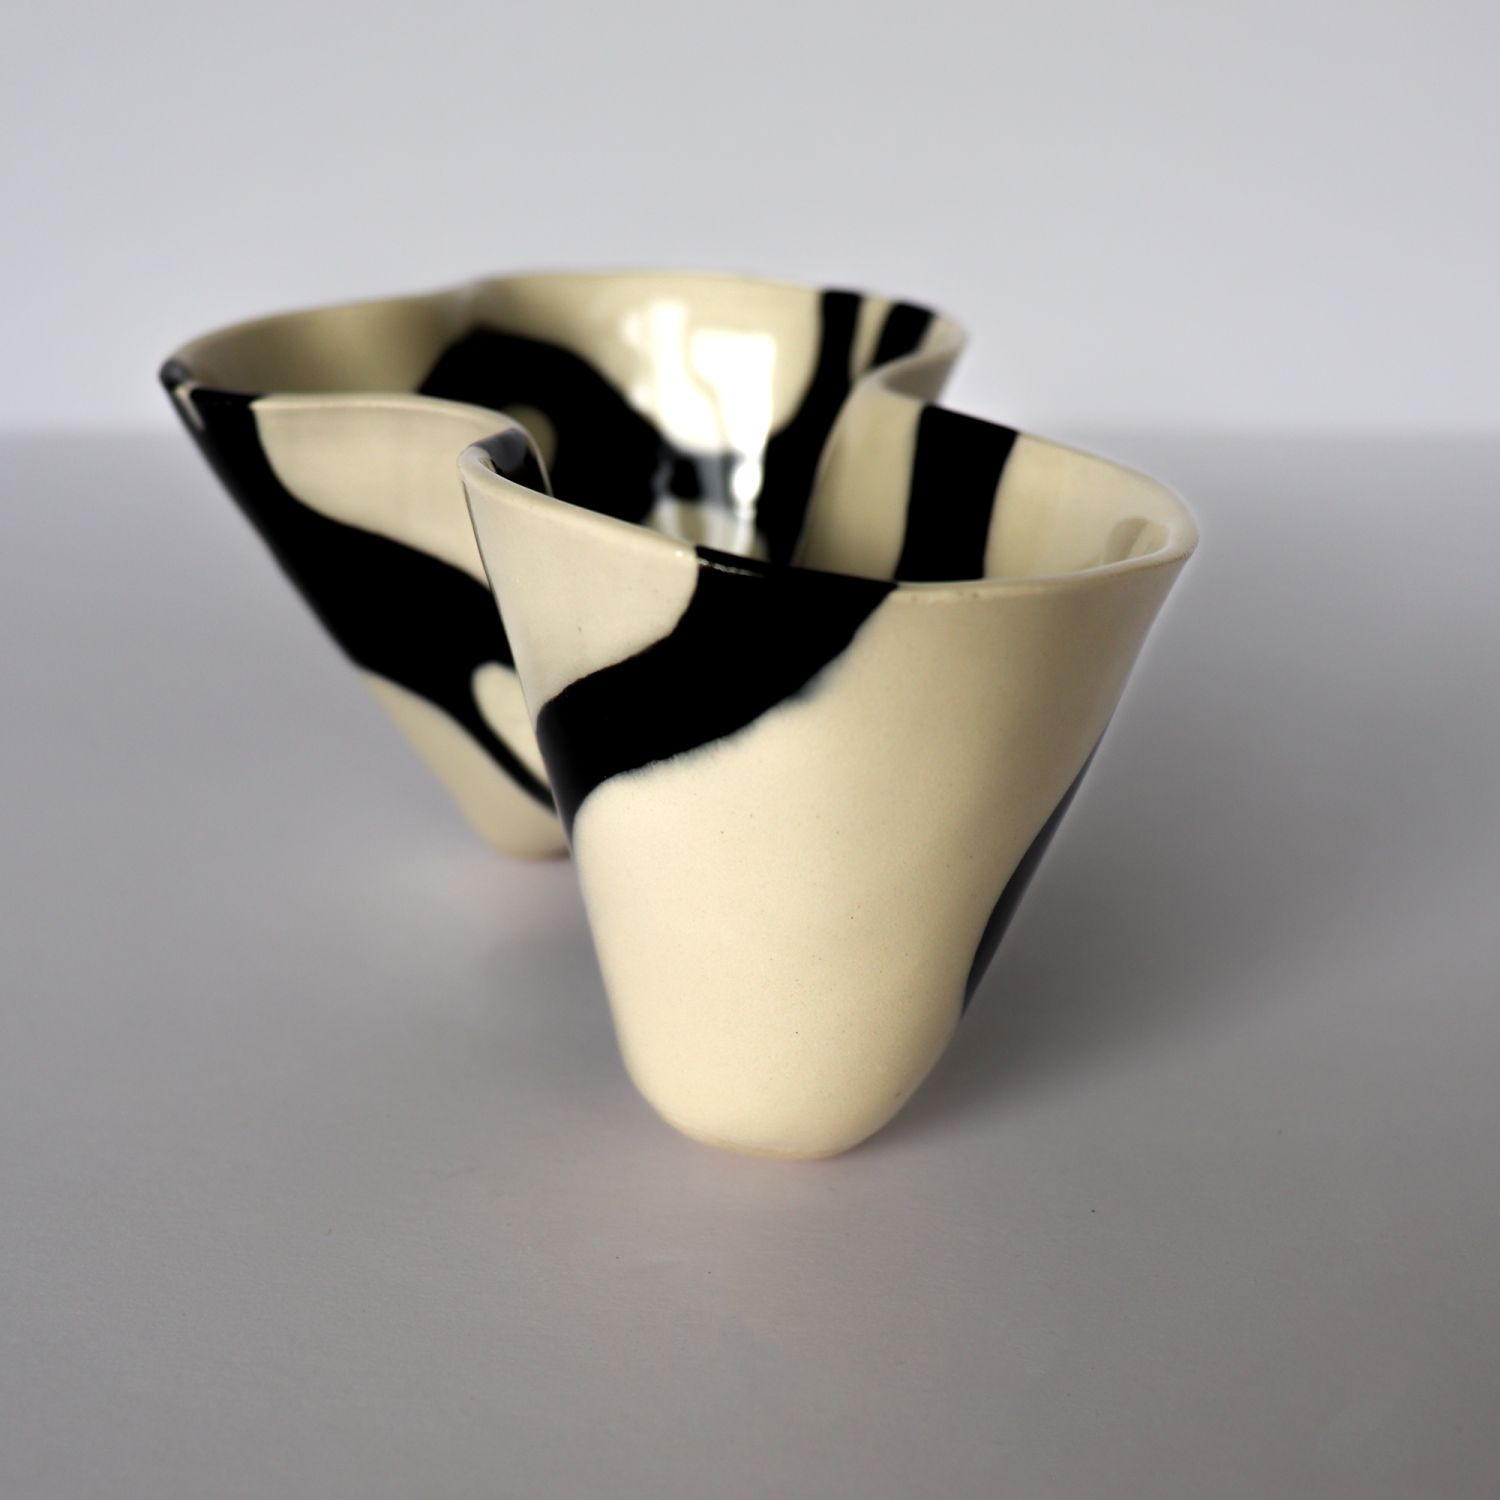 Alana Marcoccia: Interconnected Sculptural Bowl Product Image 11 of 13